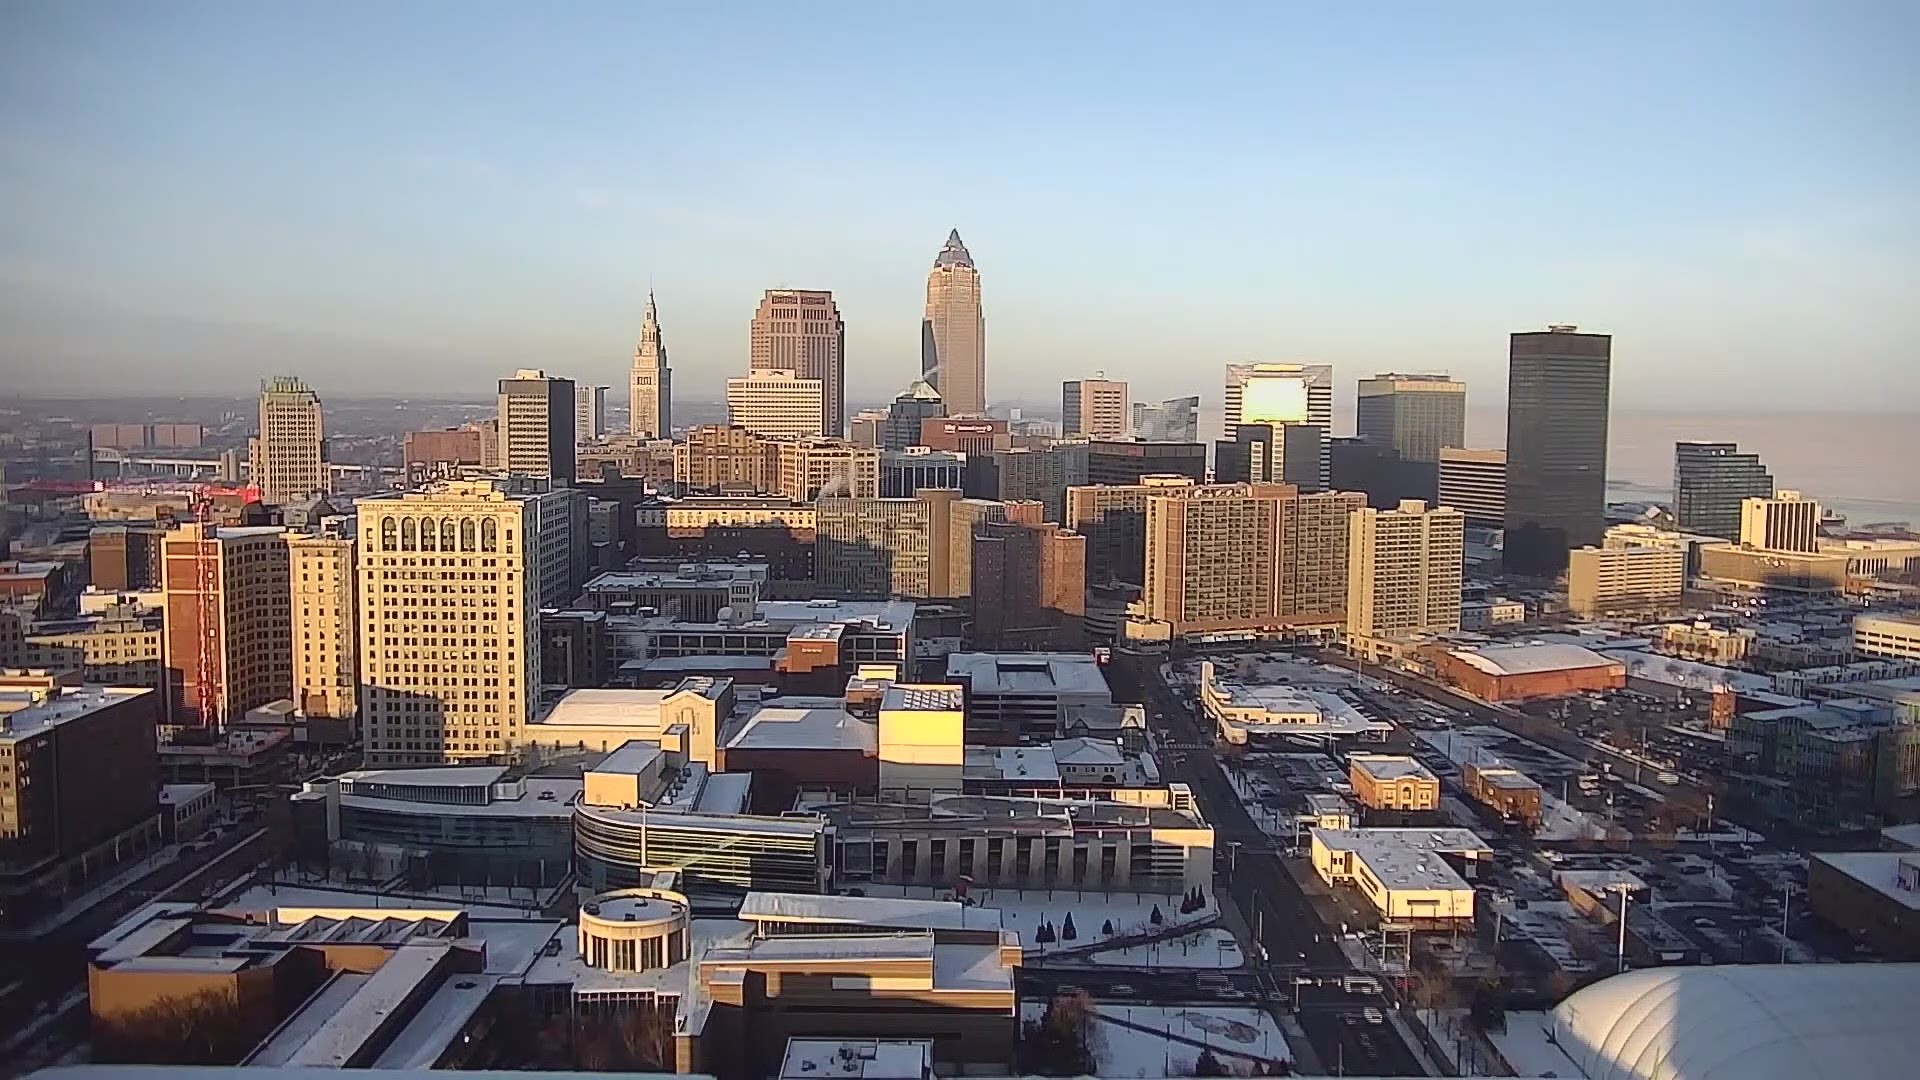 Tuesday all day Cleveland weather timelapse for February 19, 2019